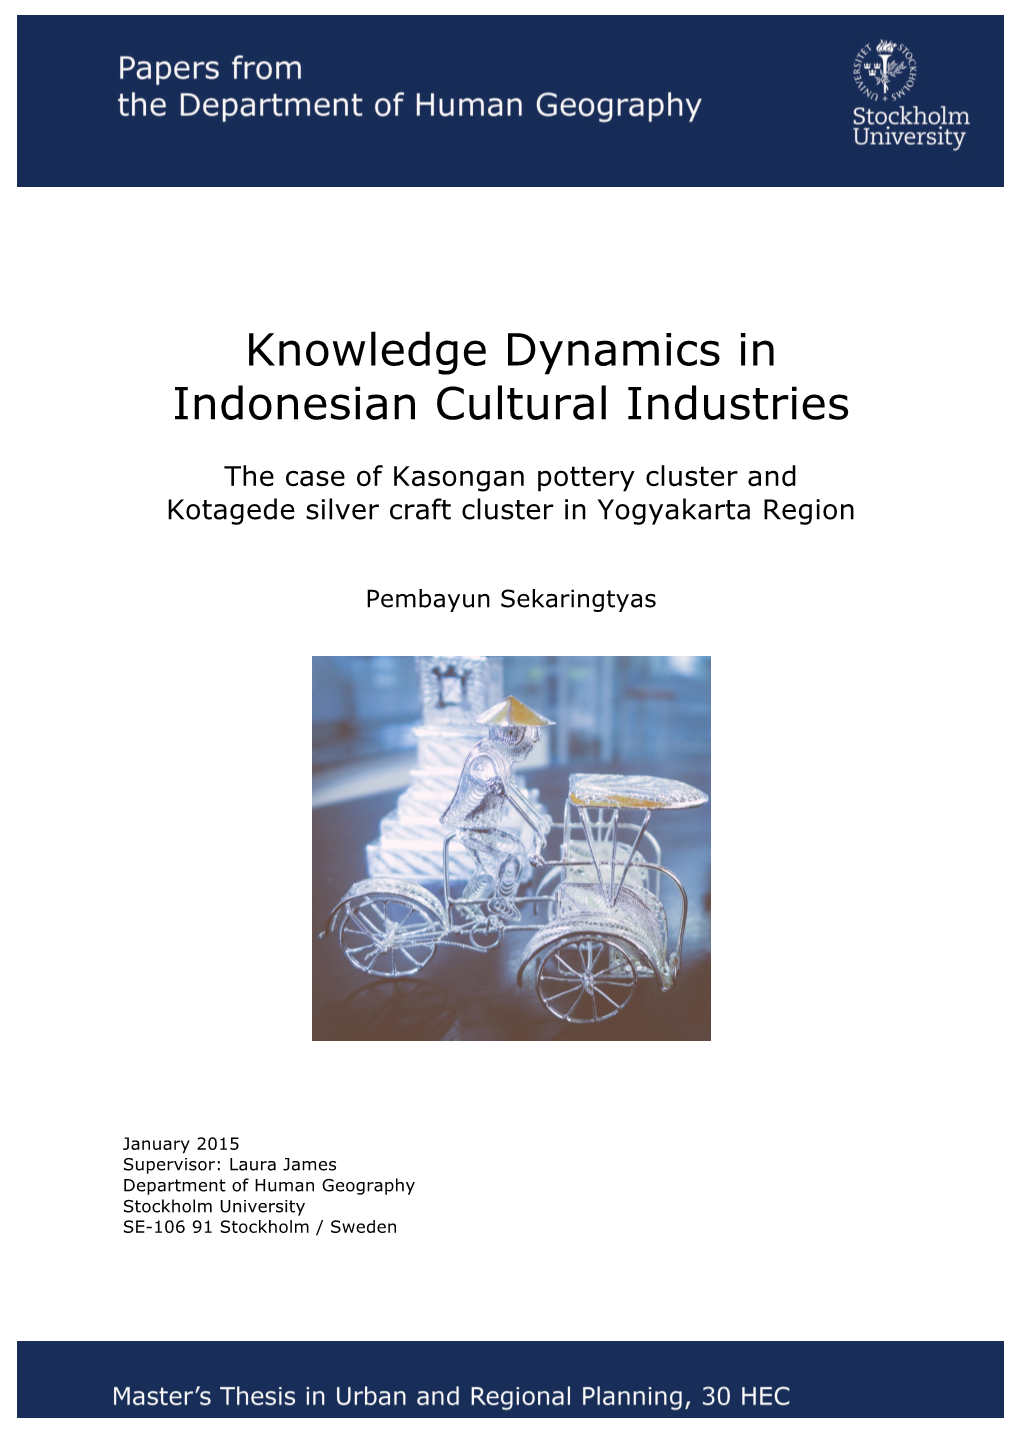 Knowledge Dynamics in Indonesian Cultural Industries